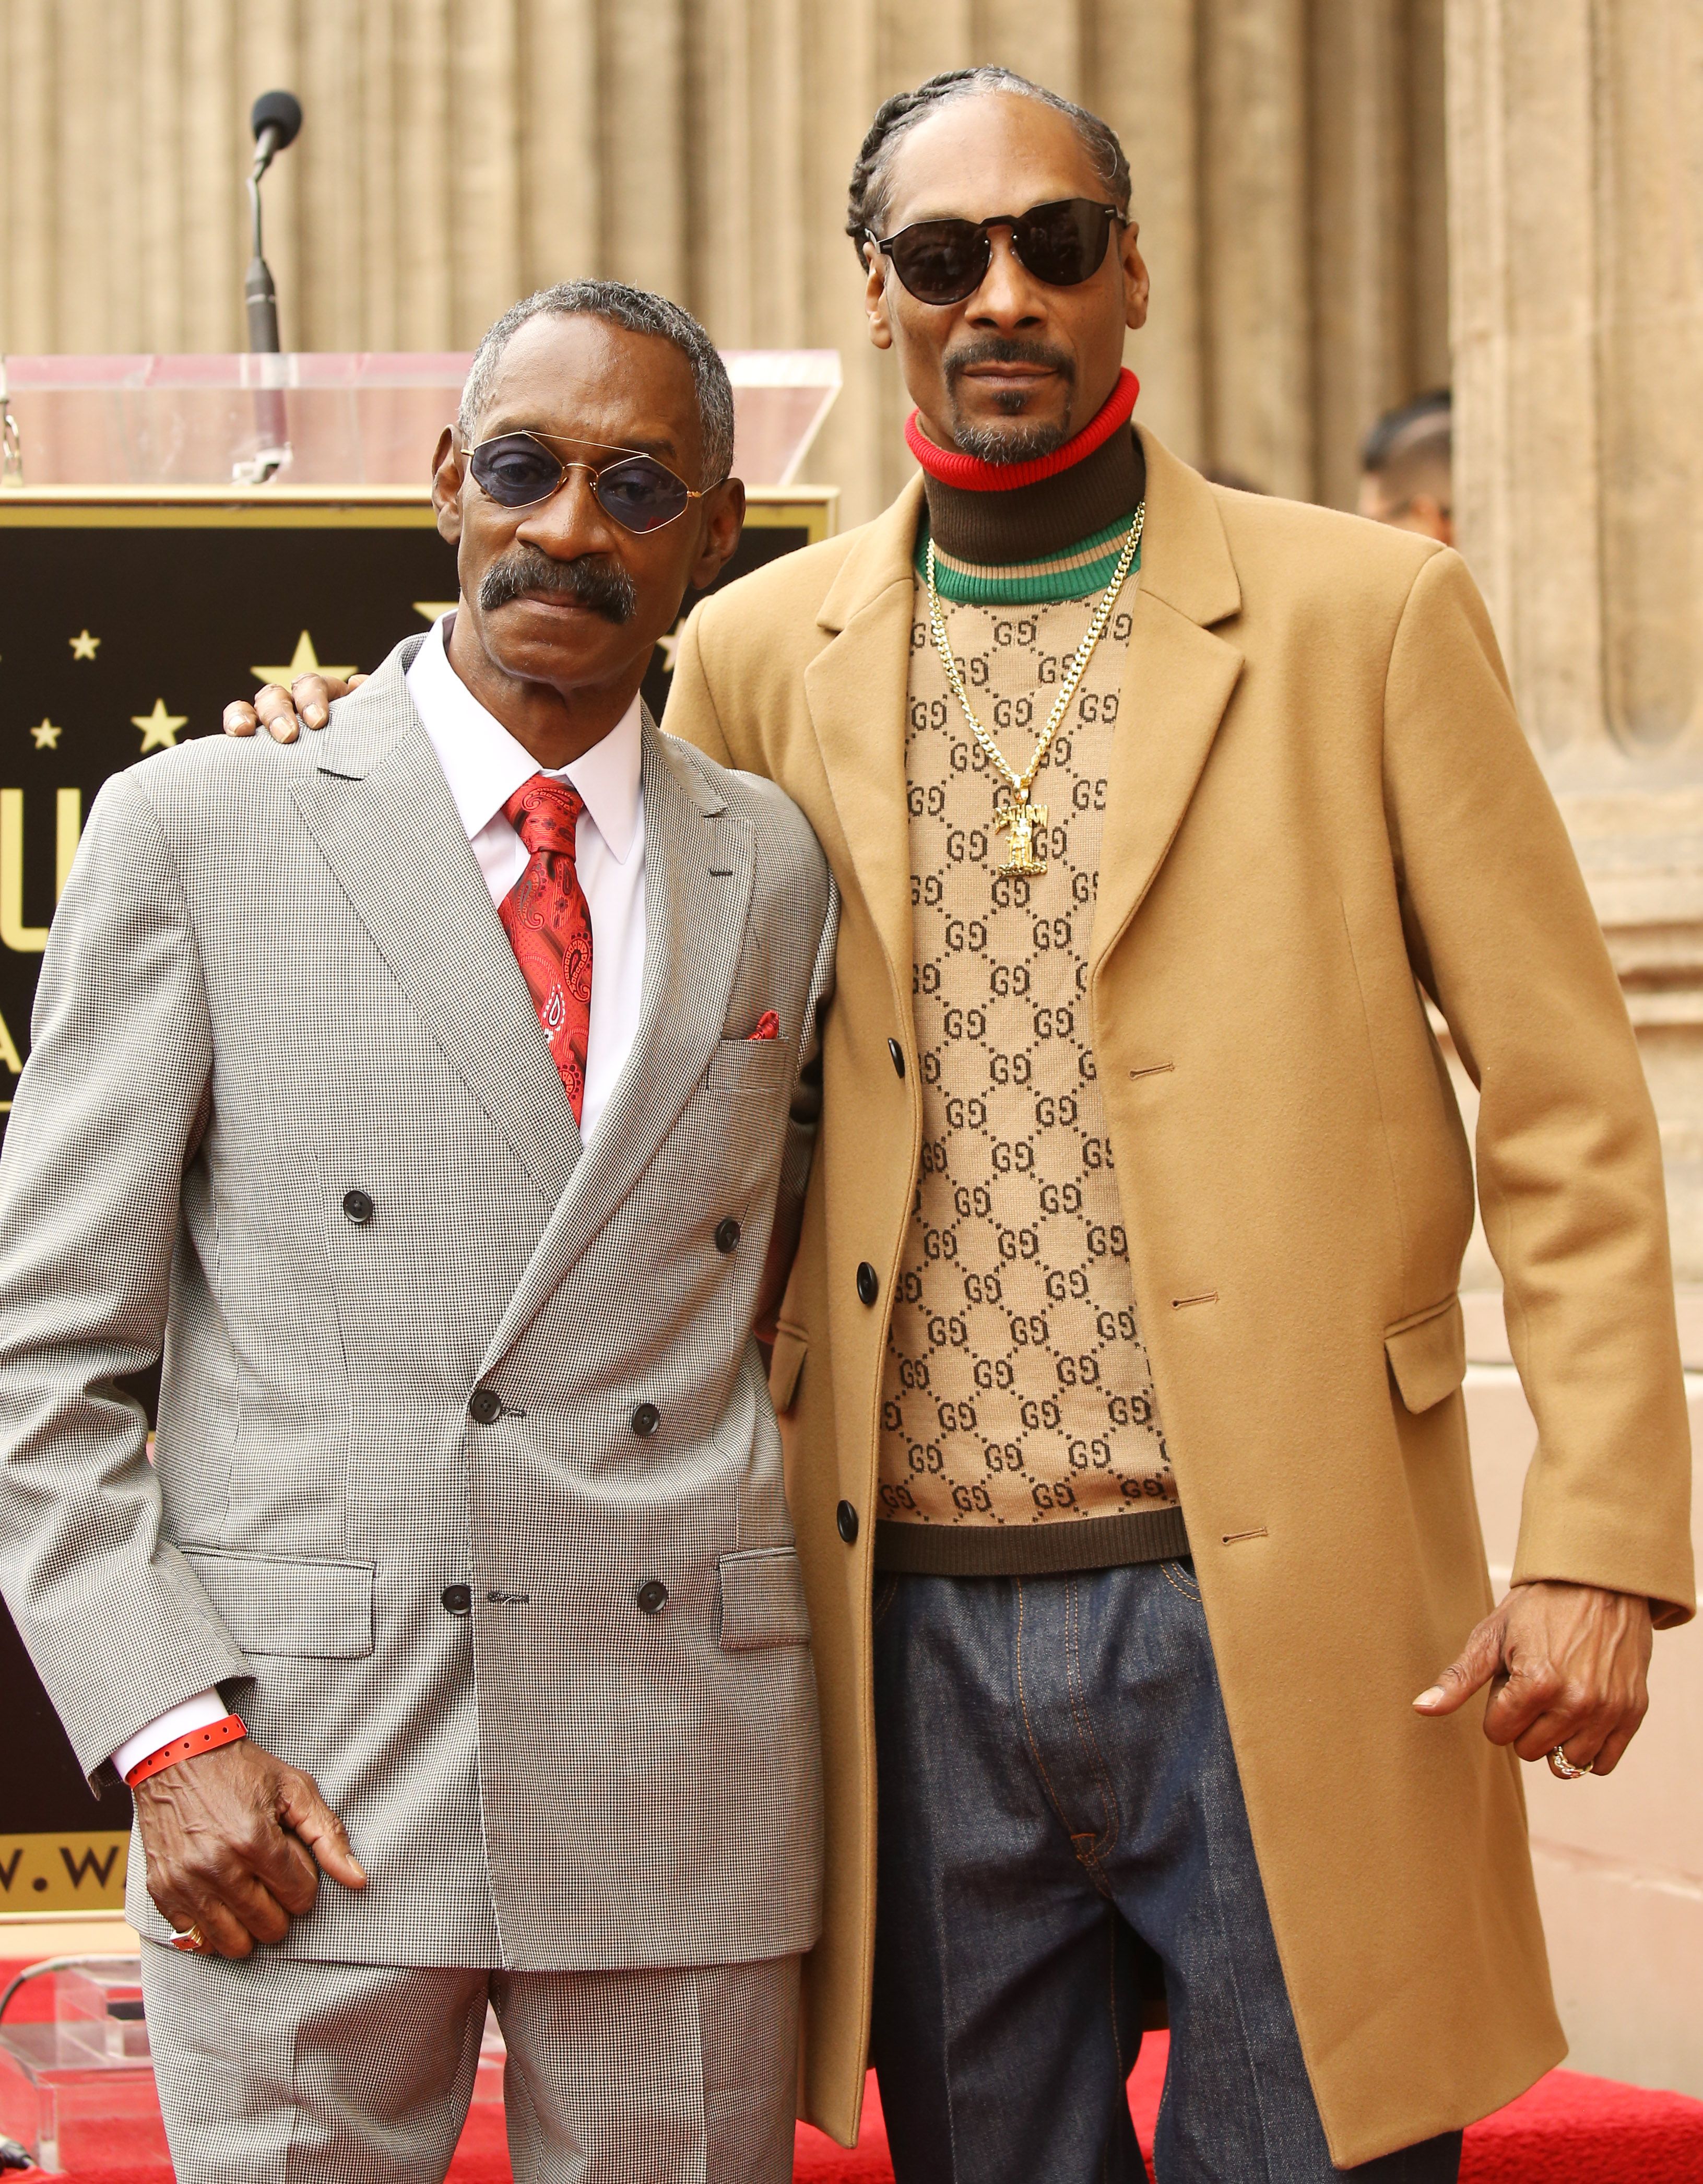 Snoop Dogg and his father at the ceremony honoring Snoop Dogg with a Star on The Hollywood Walk of Fame held on November 19, 2018 | Photo: Getty Images